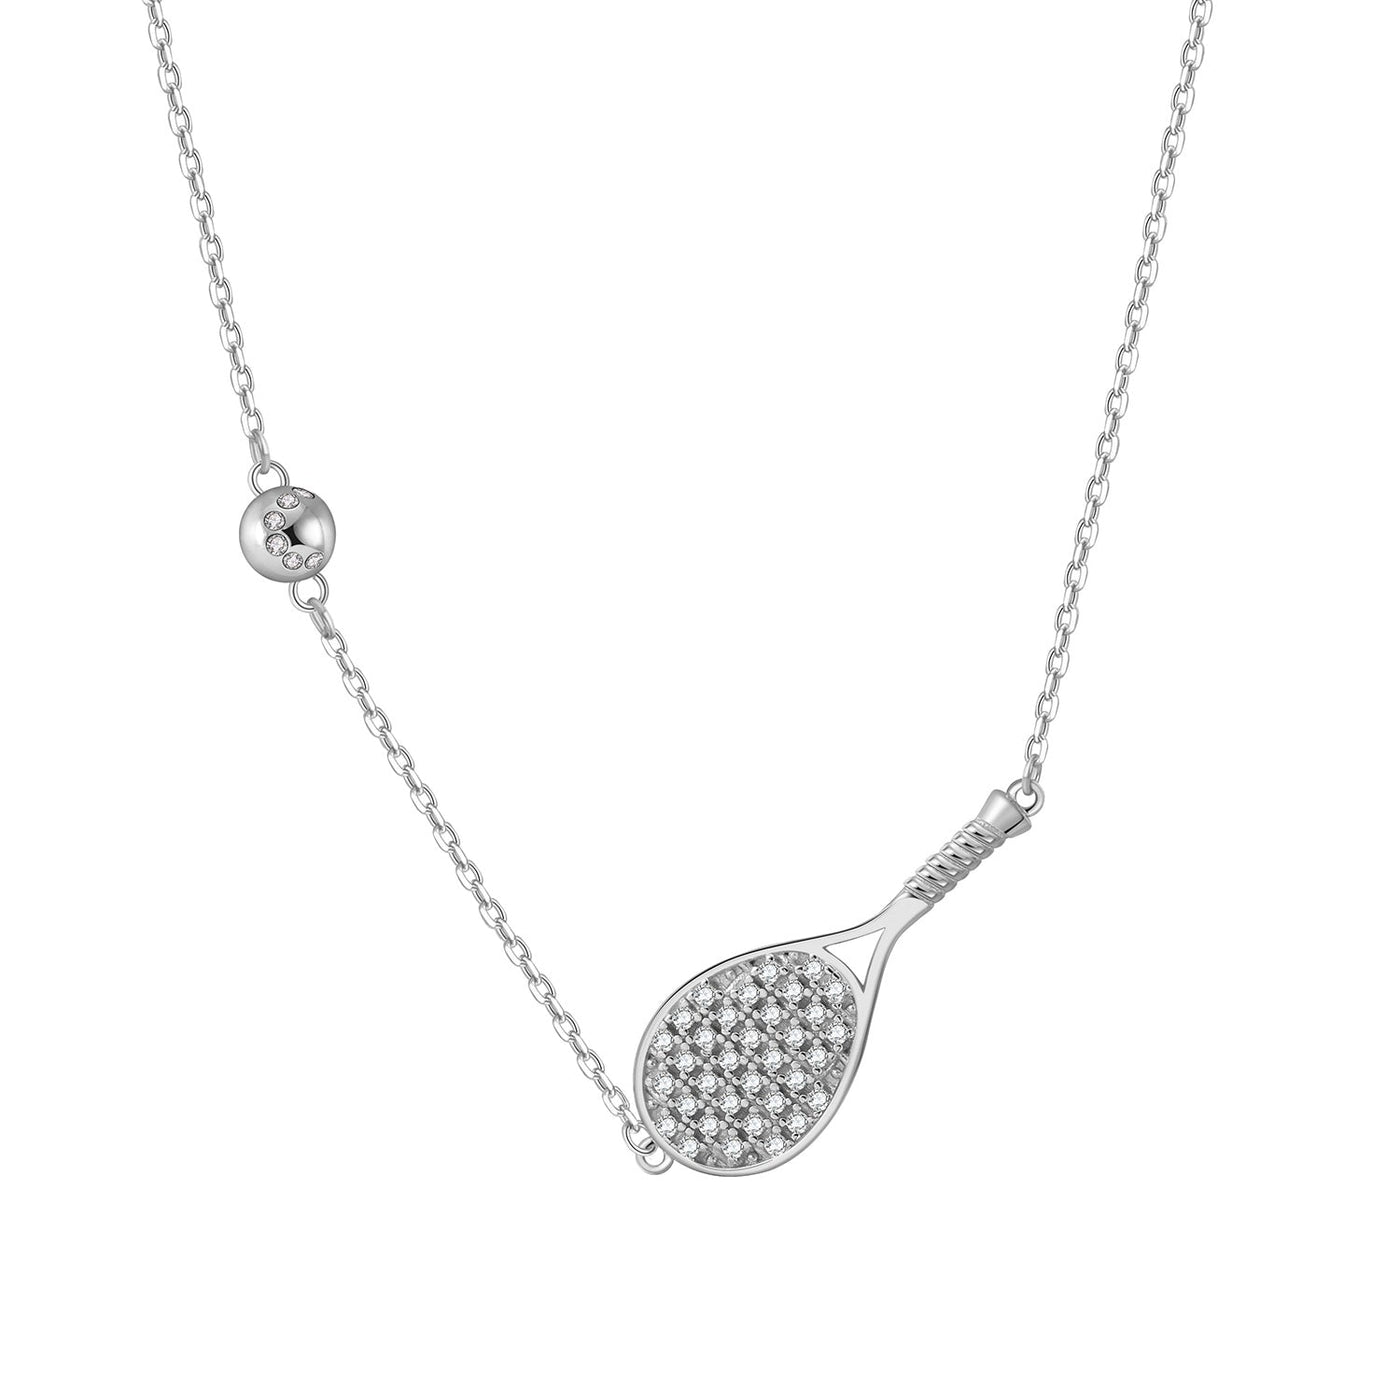 LoveMatch Tennis ACE Plus Silver Racket and Ball Necklace